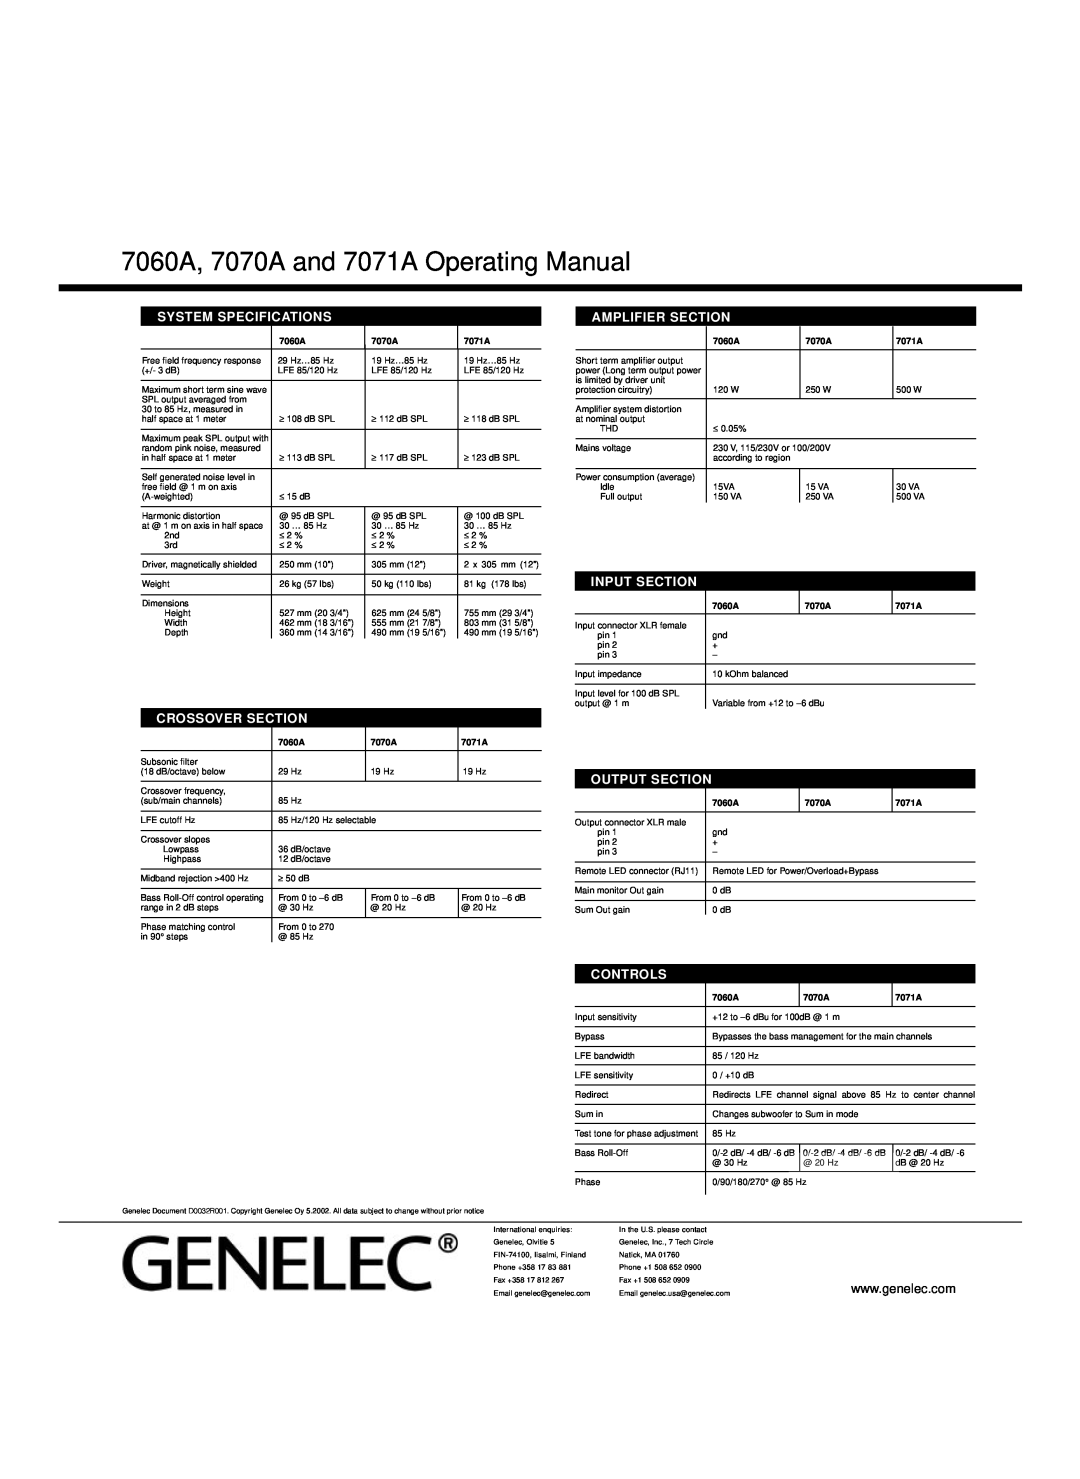 Genelec 7070A, 7071A 7060A, 7070A and 7071A Operating Manual, System Specifications, Amplifier Section, Input Section 